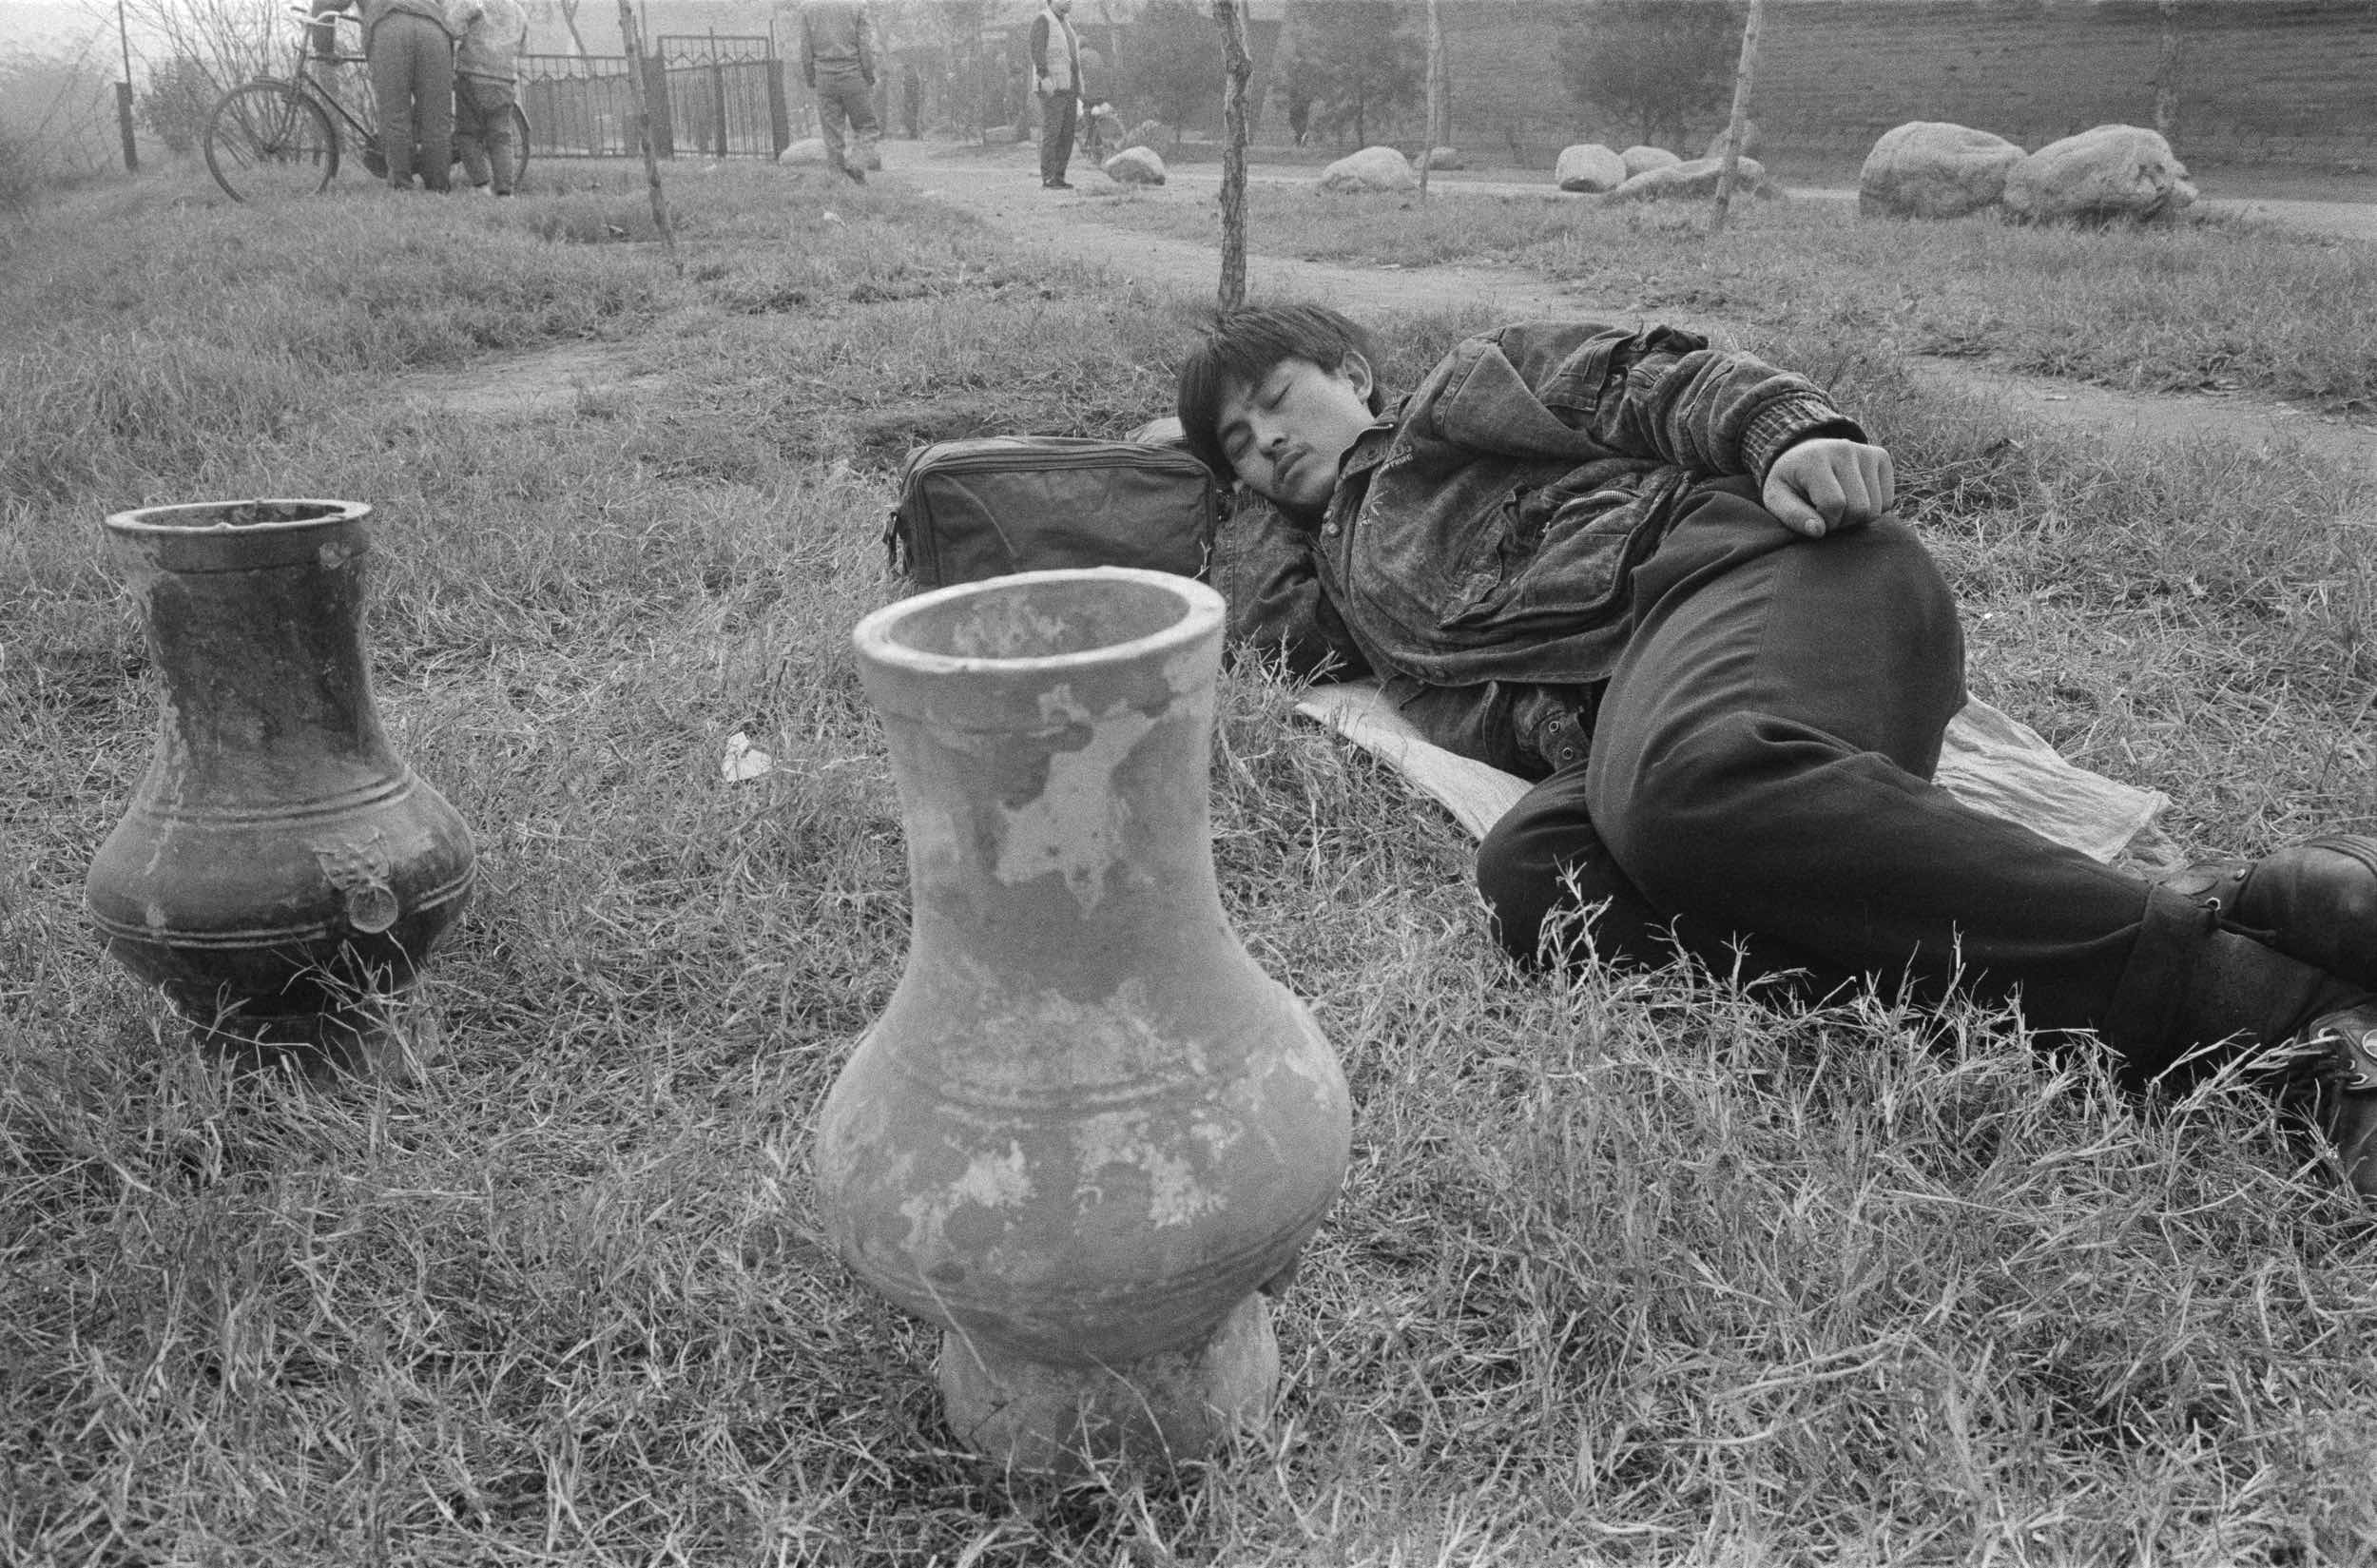 Beijing Photographs, 1993–2001. Han Dynasty urn for sale outside of the city wall of Xi’an. 1995 © Ai Weiwei